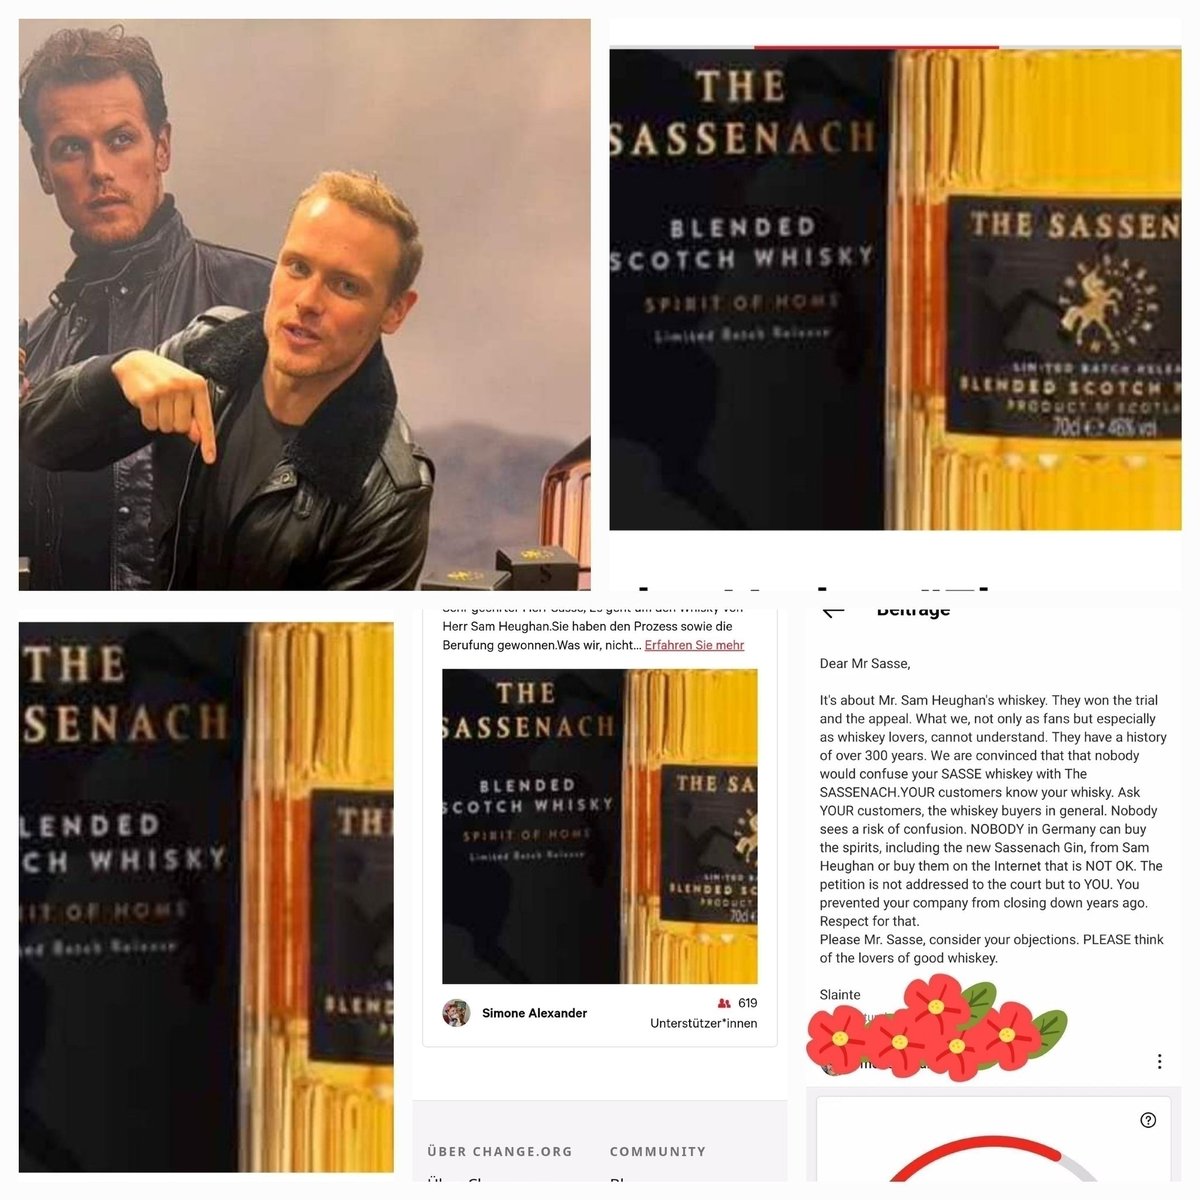 chng.it/vG6sPV7gtf #SamHeughan @SamHeughan @RealAlexNorouzi @SassenachSpirit #SassenachGin 🚩WE STAND BY 626 SIGNATURE🚩 Sam's Sassenach for ALL.We going little Steps.THANKS 🫶PLEASE keep going, we still need every vote.FOR SAM,SHARE and when you like SIGN THX🫶🏴󠁧󠁢󠁳󠁣󠁴󠁿🥃🏴󠁧󠁢󠁳󠁣󠁴󠁿❣️